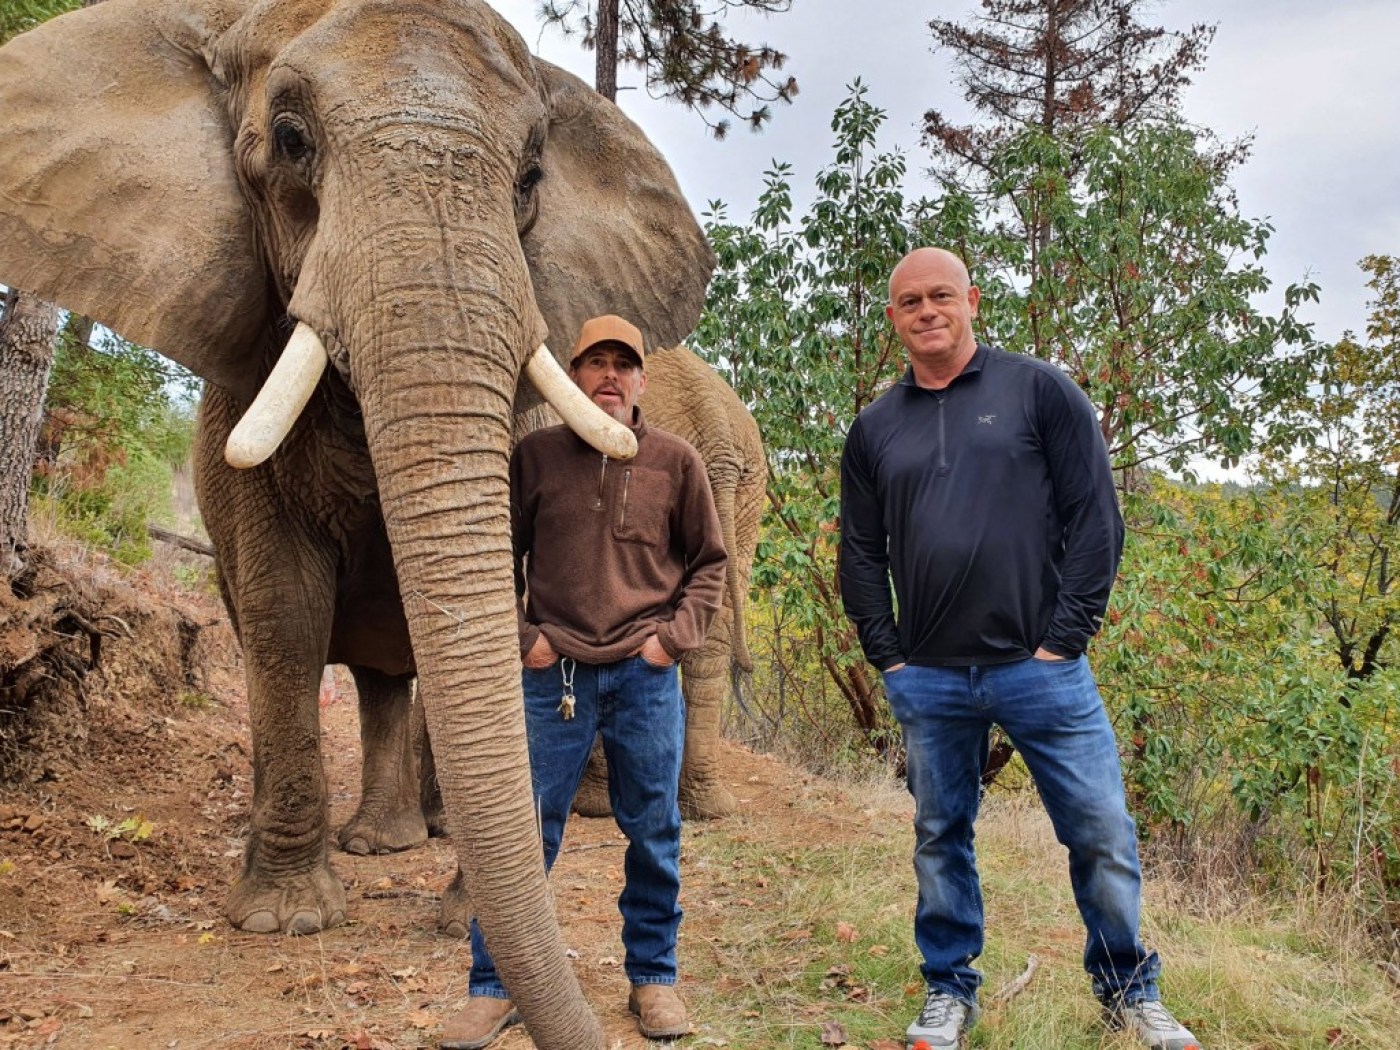 From Rare Tv Ltd SEARCHING FOR MICHAEL JACKSONS ZOO WITH ROSS KEMP Wednesday 27th April 2022 on ITV Pictured: Ross Kemp (right) with Elephant Trainer Josh And one of Michael Jacksons Elephants called Baba Ross Kemp sets out to track down some of the dozens of animals once owned by pop star Michael Jackson at his Neverland ranch, including giraffes and elephants - many of whose whereabouts have been unknown since the singer?s death in 2009. On a road trip that takes him from the west to east coast of America, Kemp meets former Neverland employees who describe Jackson as an animal lover and conservationist. But the presenter discovers disturbing new information about the sourcing of the animals, how they were treated in Jackson?s care and where they ended up when Neverland closed. On his journey Kemp also explores the booming trade in exotic wild animals still kept as pets across the United States. (C). Rare Tv Ltd For further information please contact Peter Gray Mob 07831460662 / peter.gray@itv.com This photograph is (C) Rare Tv Ltd and can only be reproduced for editorial purposes directly in connection with the programme SEARCHING FOR MICHAEL JACKSONS ZOO WITH ROSS KEMP or ITV. Once made available by the ITV Picture Desk, this photograph can be reproduced once only up until the Transmission date and no reproduction fee will be charged. Any subsequent usage may incur a fee. This photograph must not be syndicated to any other publication or website, or permanently archived, without the express written permission of ITV Picture Desk. Full Terms and conditions are available on the website www.itvpictures.com